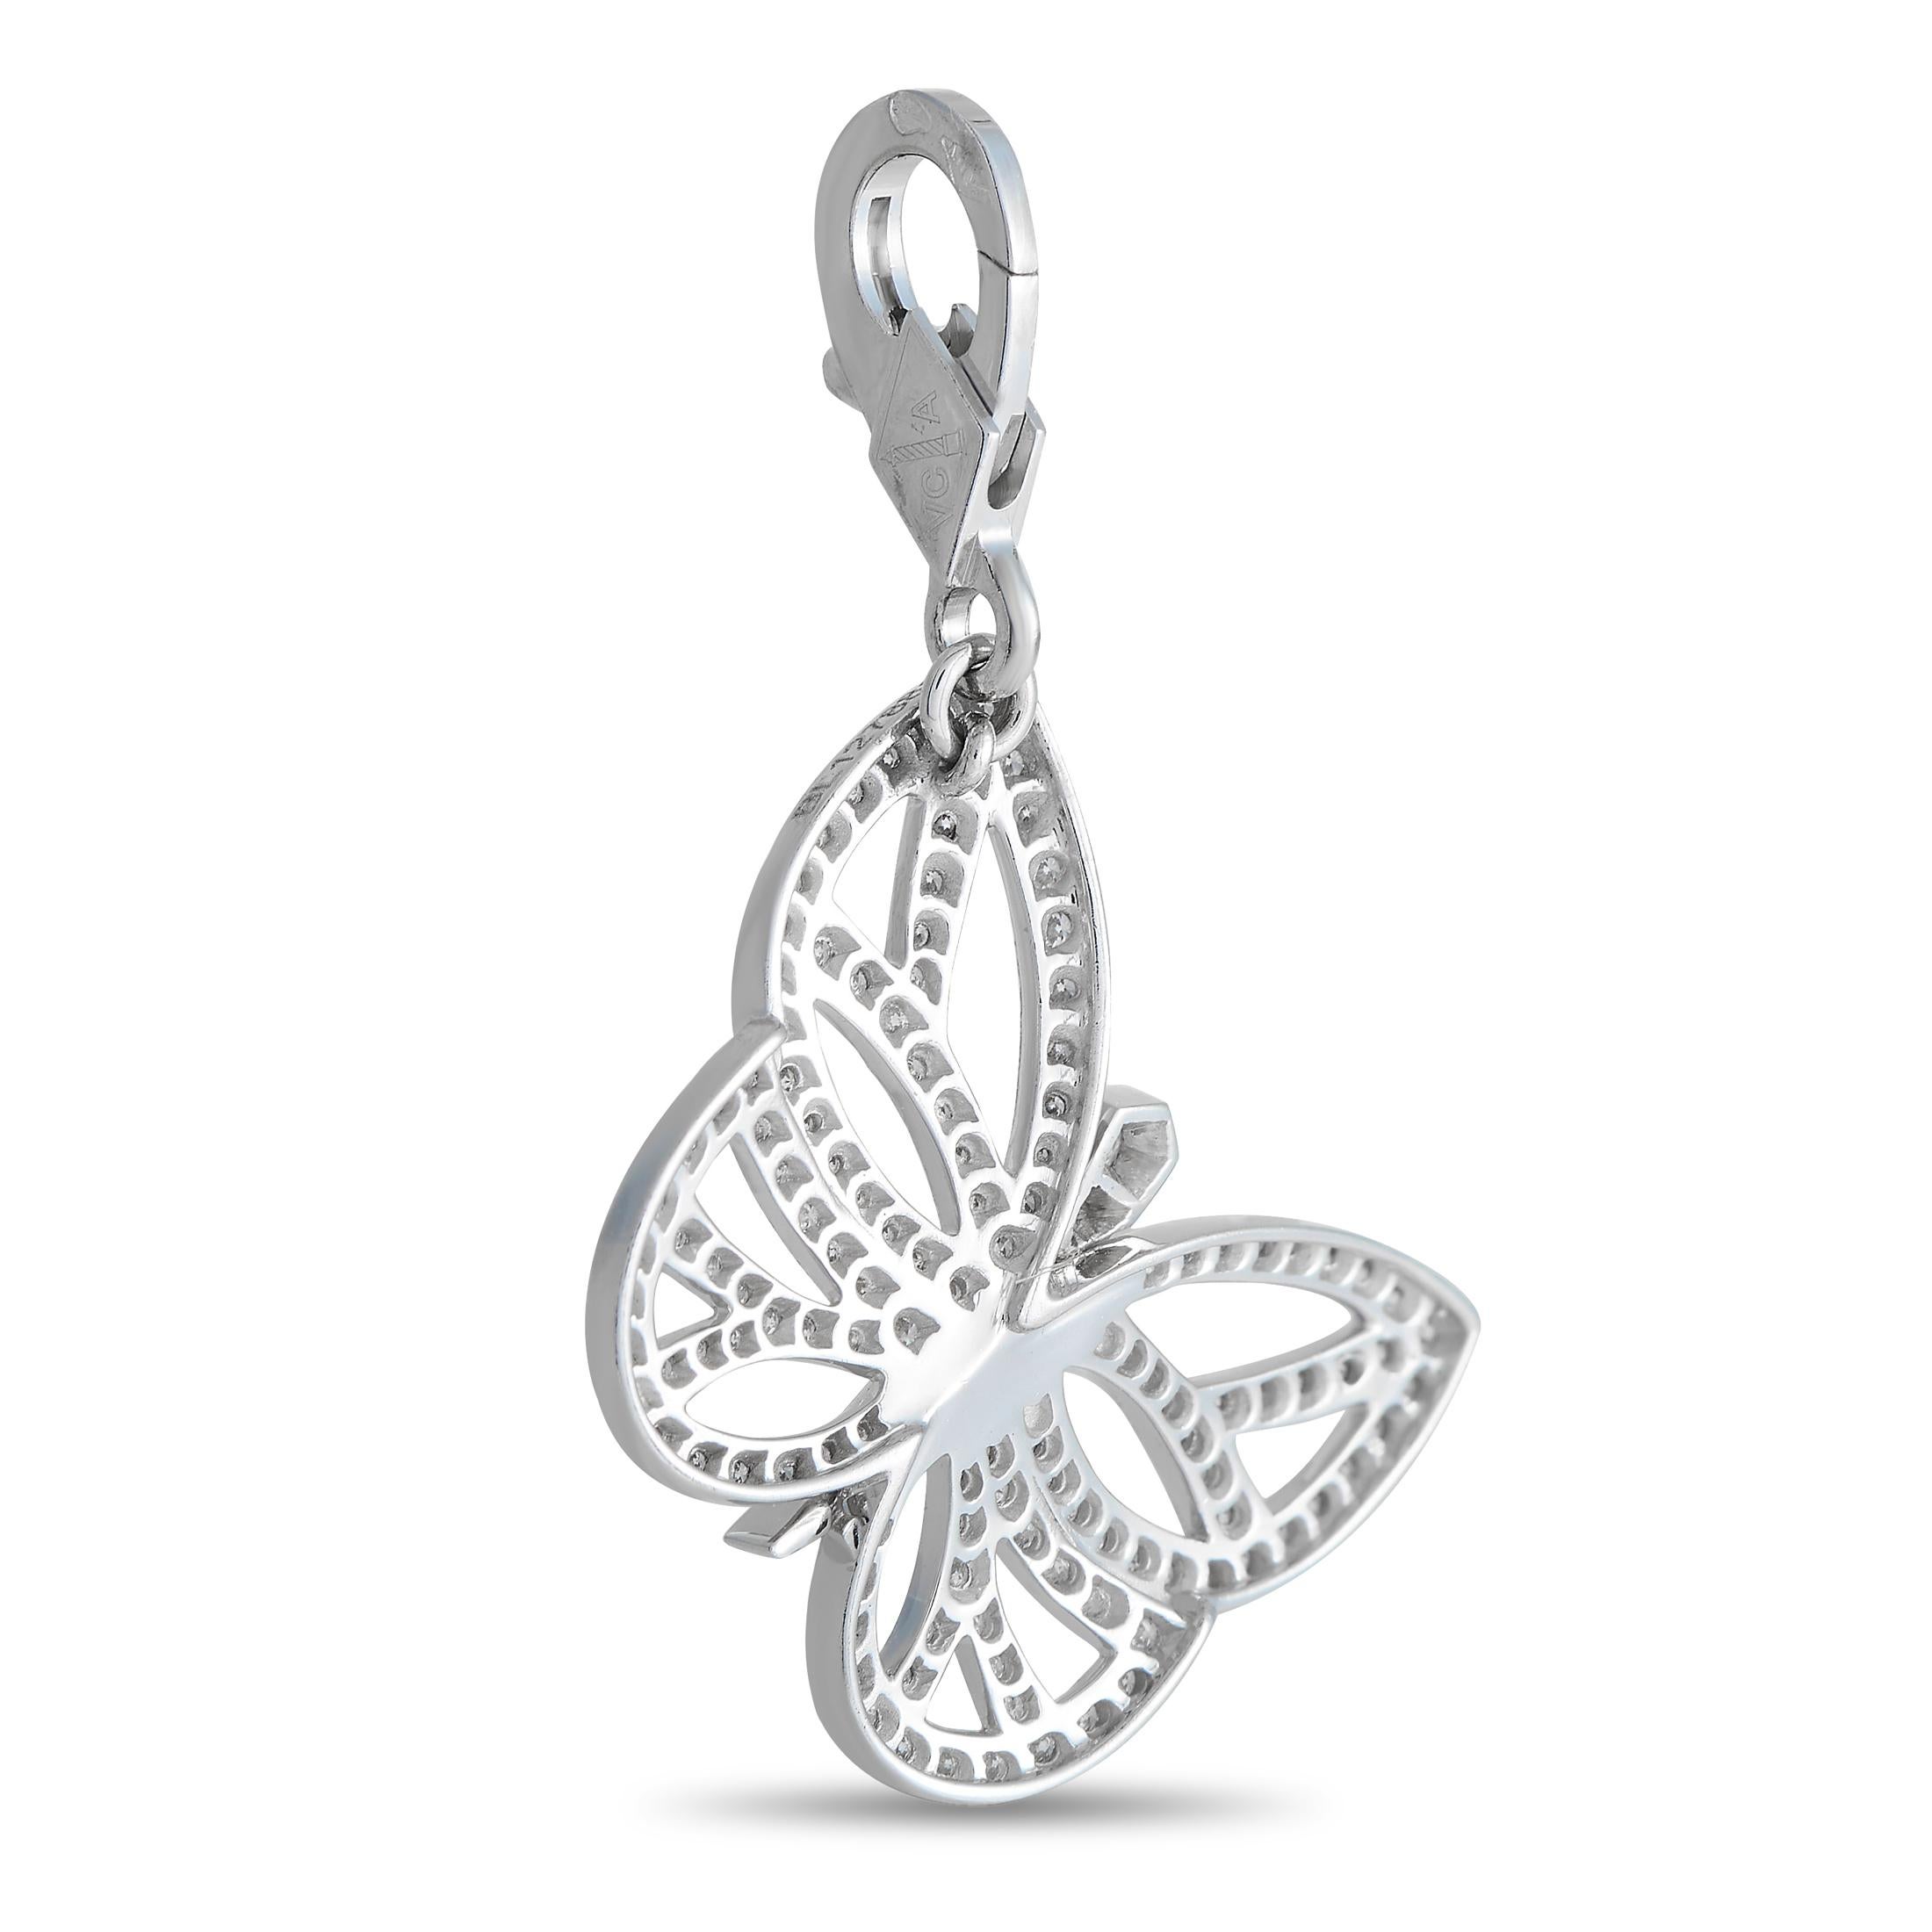 Let this diamond-studded butterfly charm from Van Cleef & Arpels bring a flutter of beauty and sparkle to your day. The charm is crafted in 18K white gold and features a butterfly outline traced by round brilliant diamonds. The butterfly charm is